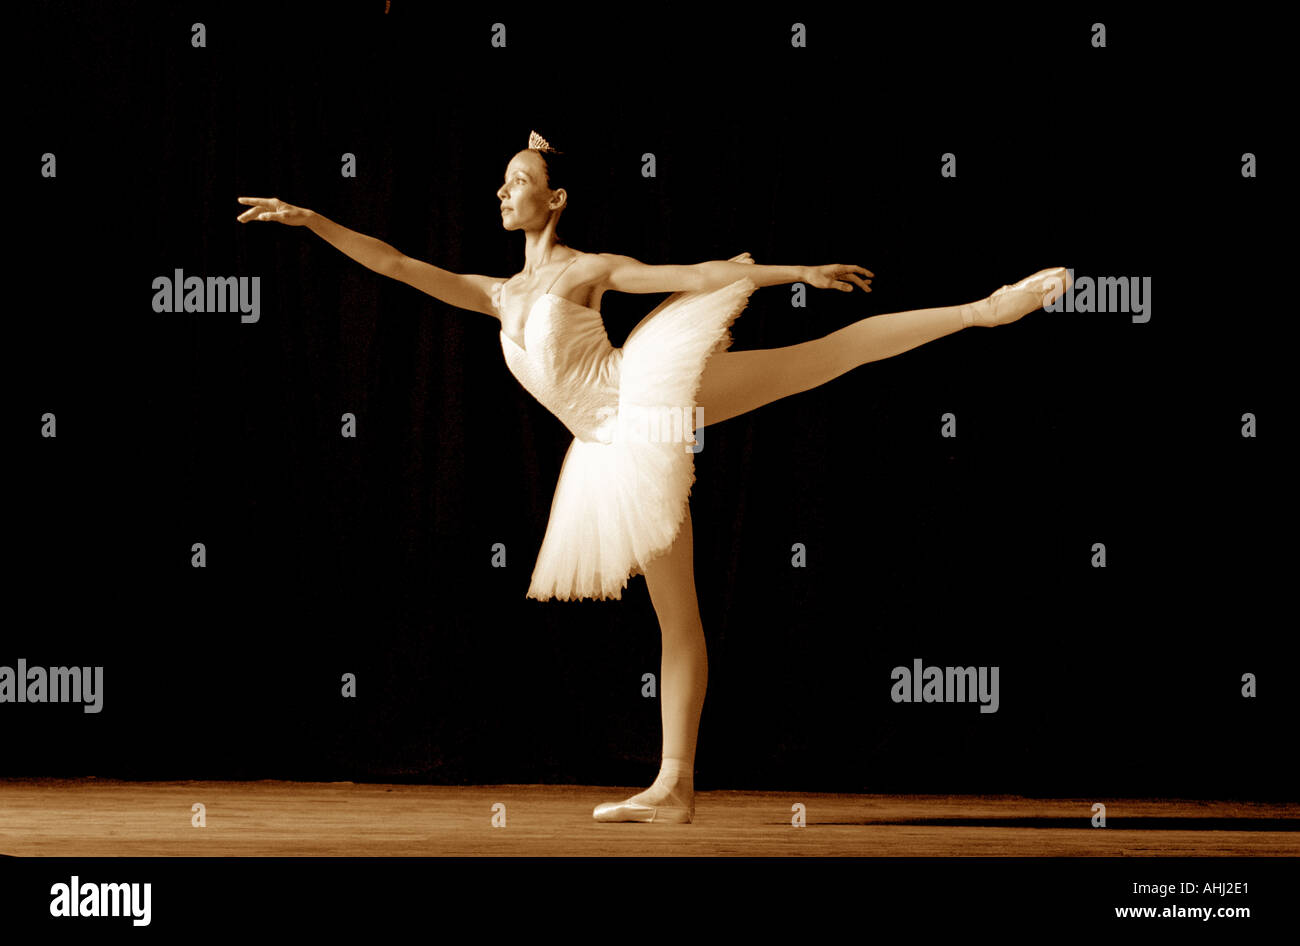 Female ballet dancer standing on her toes in toe shoes ballet dancer stage performance Stock Photo